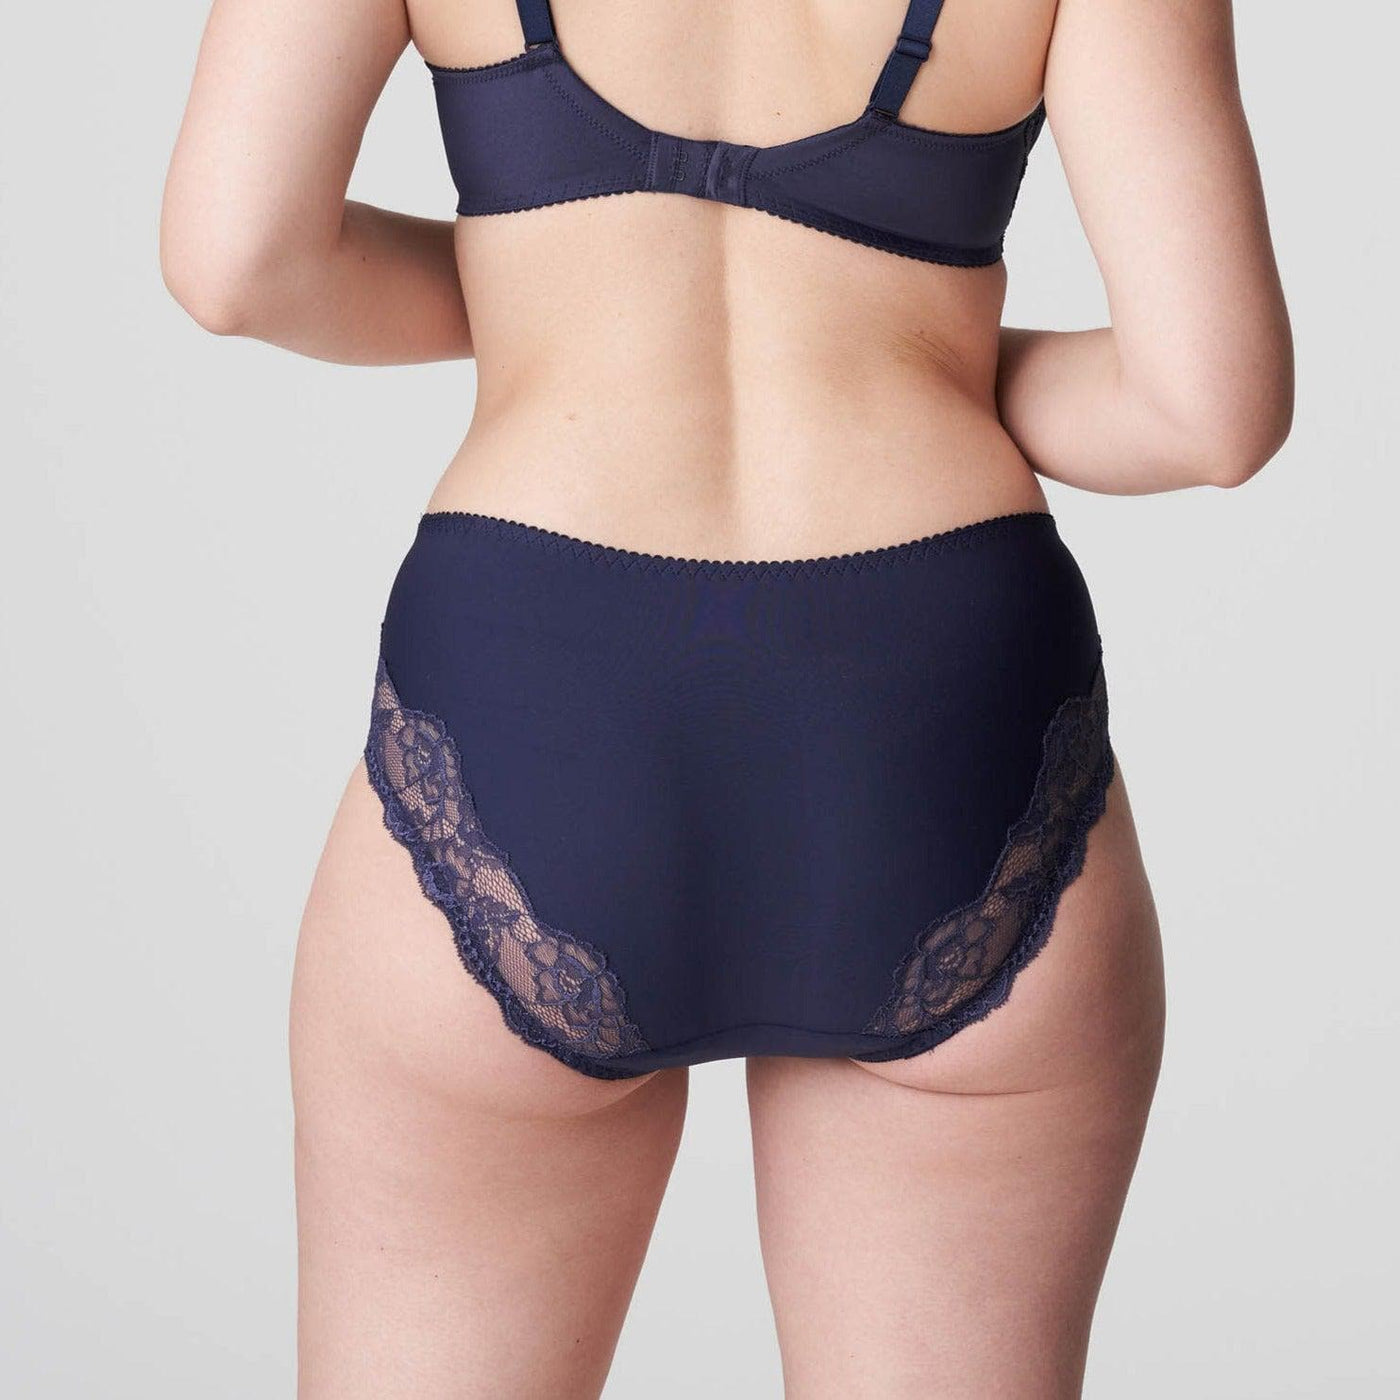 Prima Donna Madison Full Brief in Bleu Bijou 0562126-Panties-Prima Donna-Bleu Bijou-Medium-Anna Bella Fine Lingerie, Reveal Your Most Gorgeous Self!